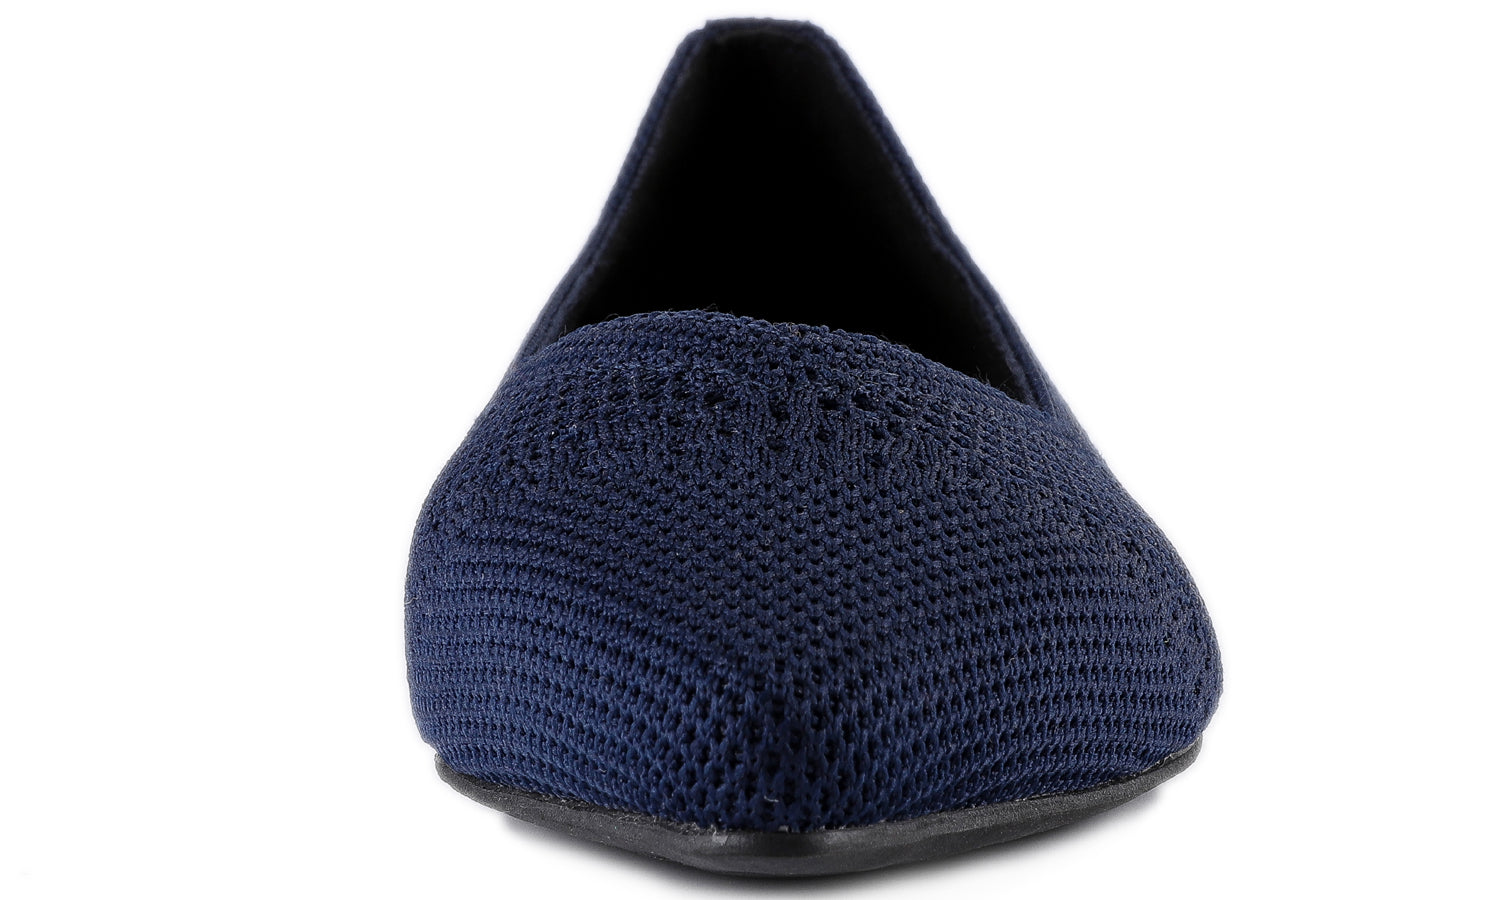 Feversole Women's Woven Fashion Breathable Knit Flat Shoes Pointed Navy